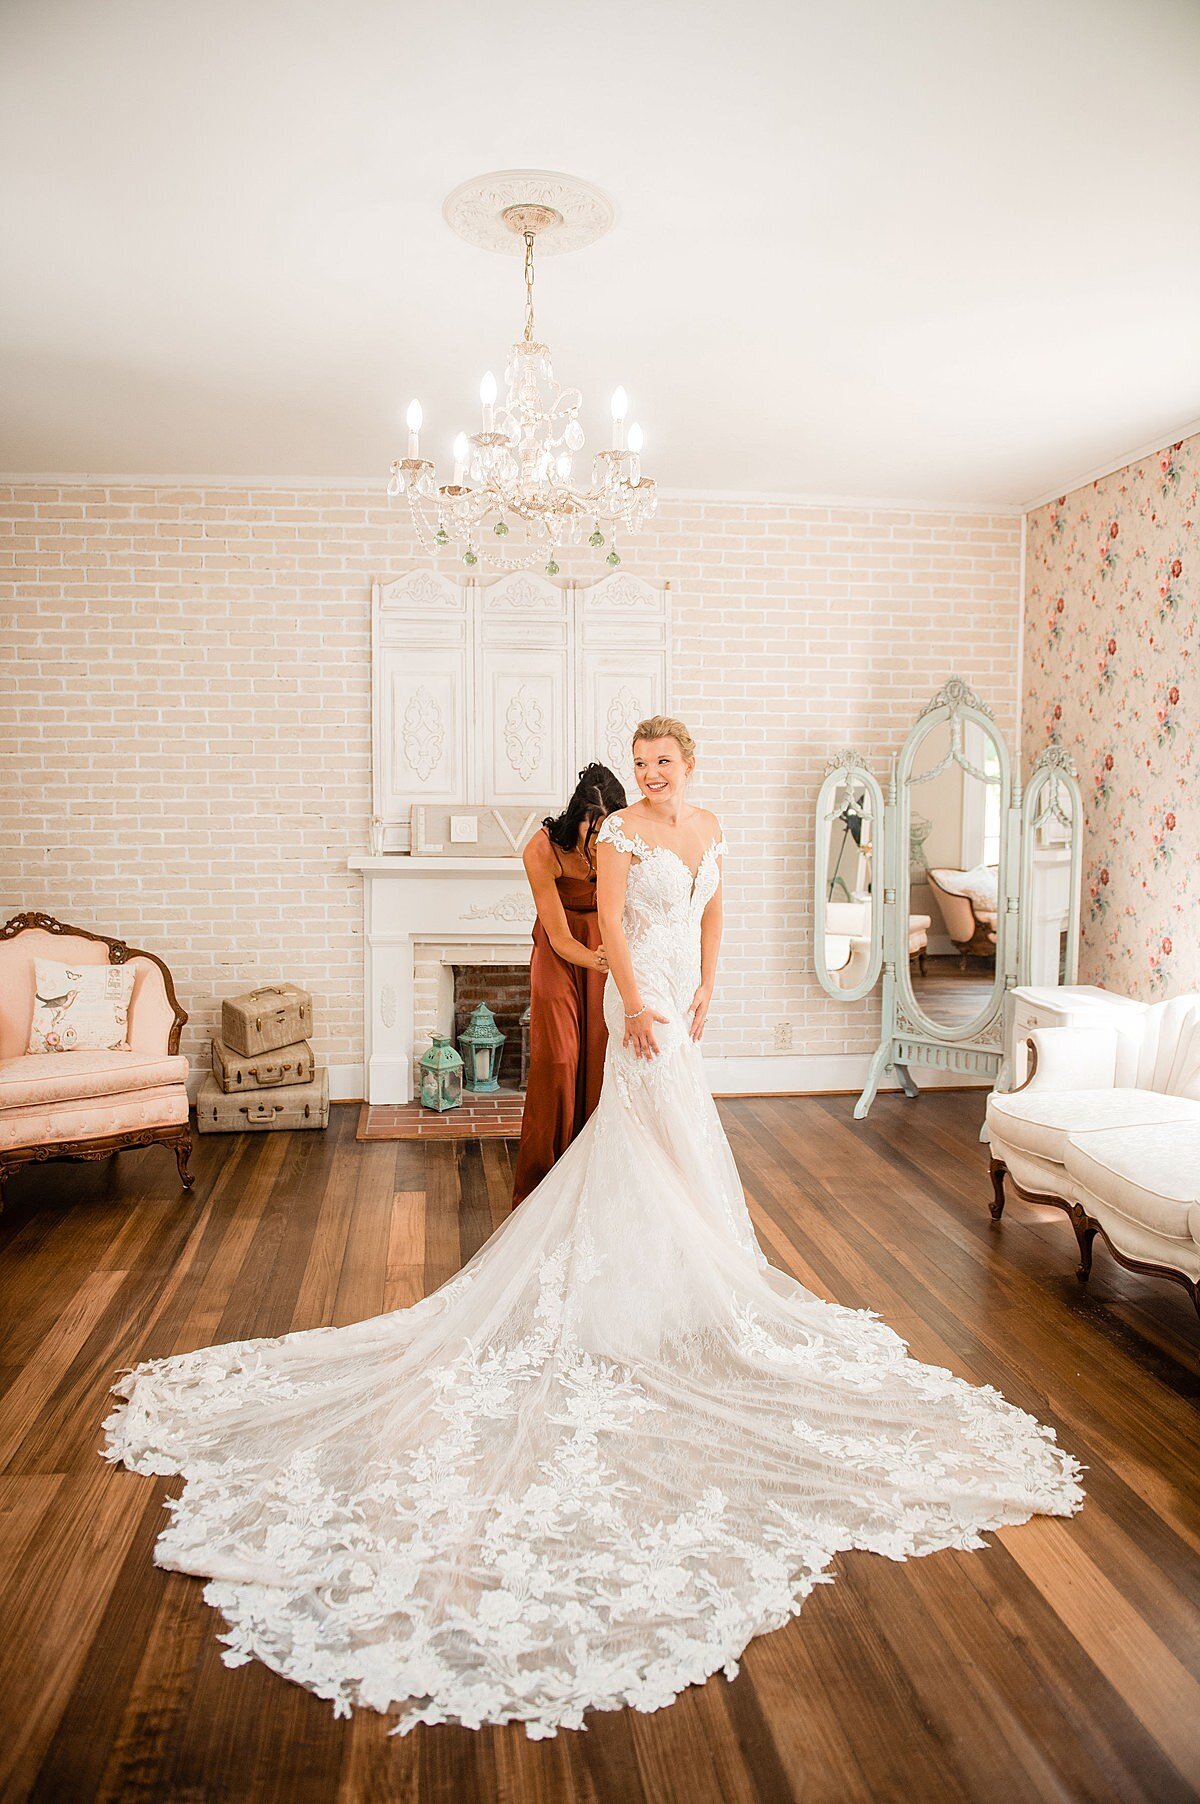 Mother of bride helping button her daughters wedding dress in an elegant bridal suite